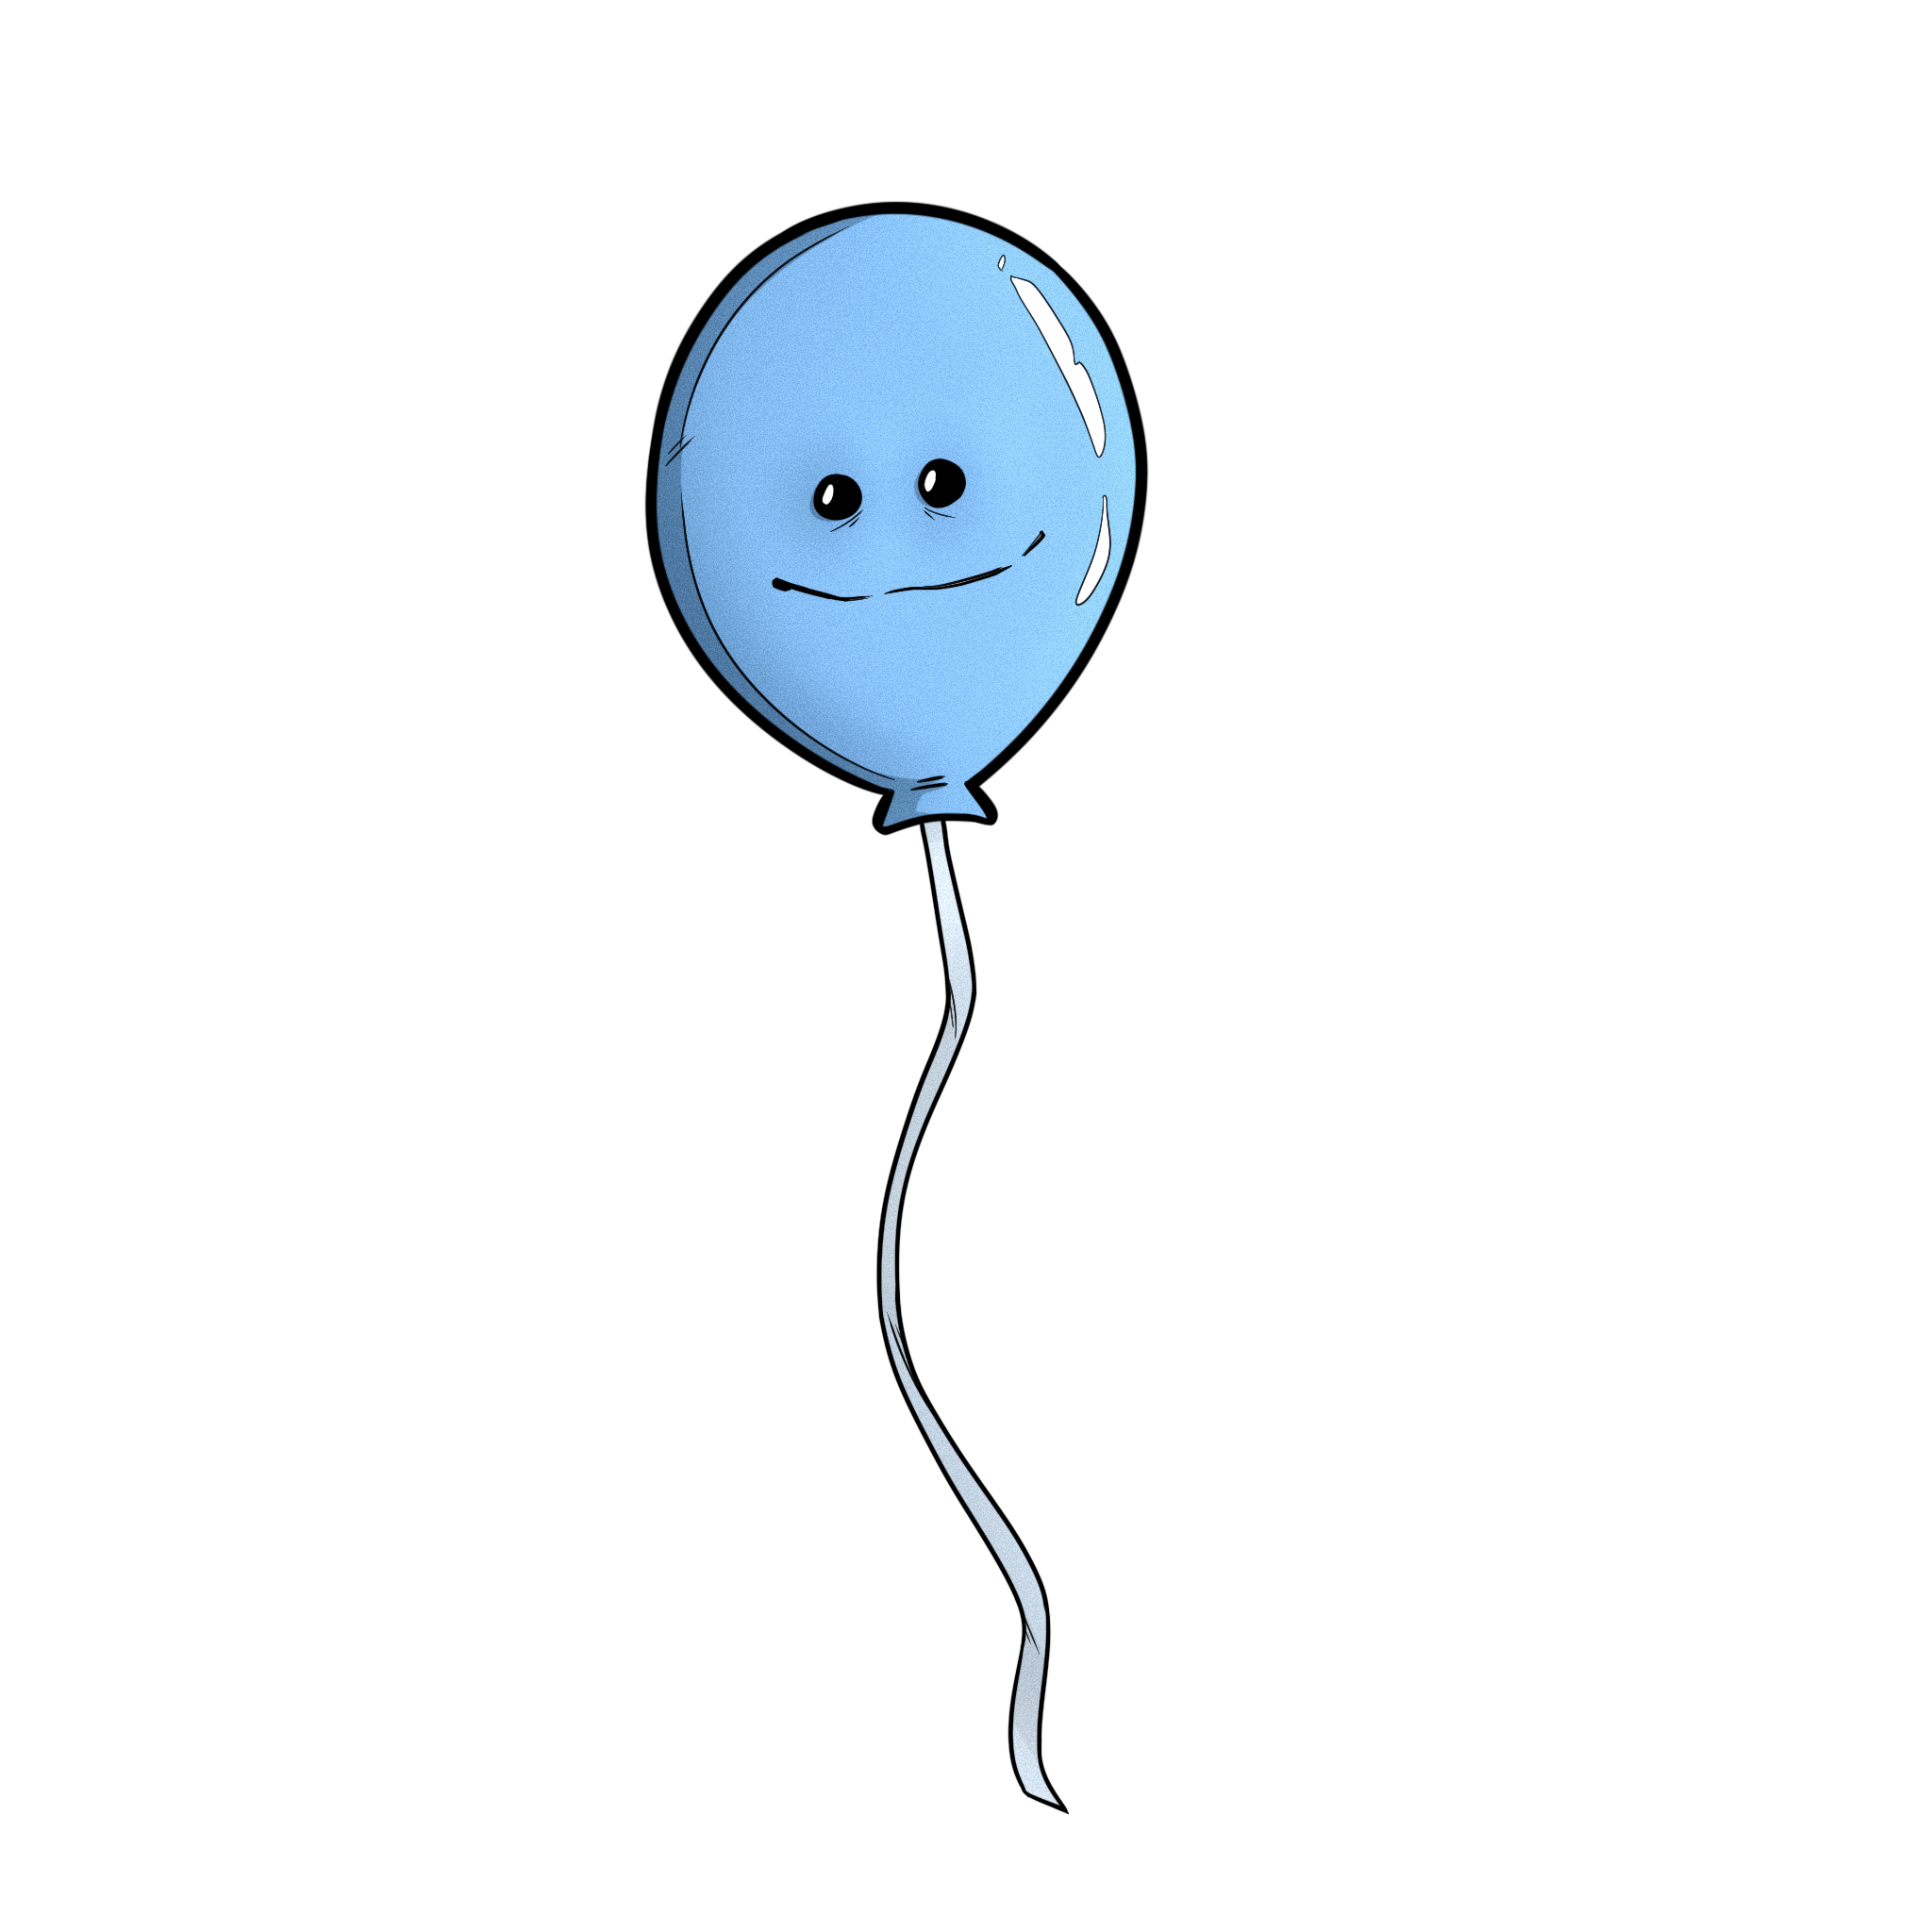 Right here is a blue balloon I drew